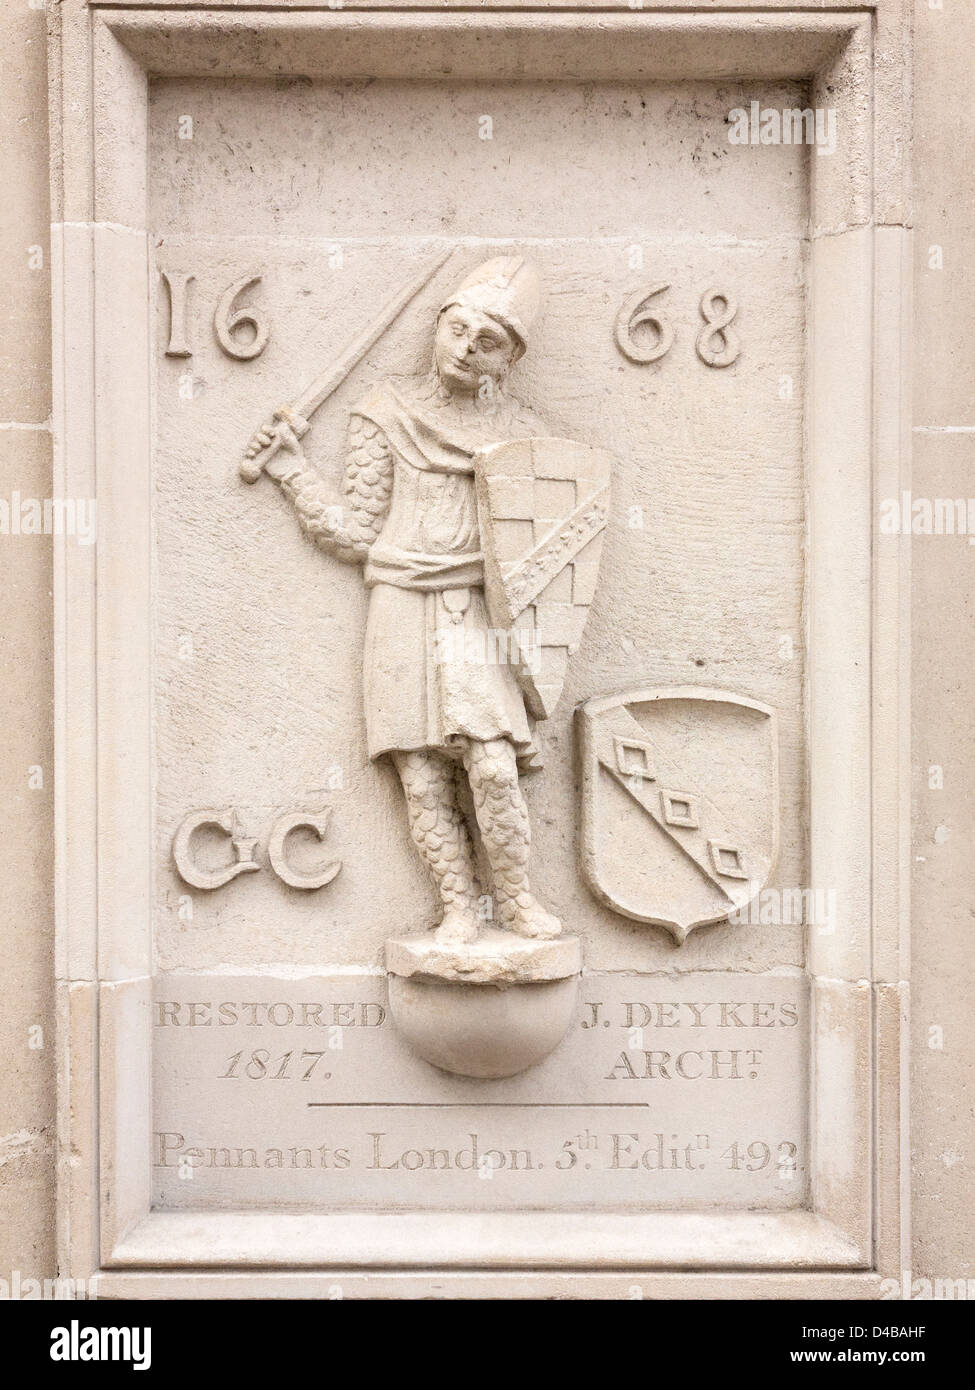 Stone plaque carving of soldier with date 1668 on the Axa insurance building in London, England Stock Photo